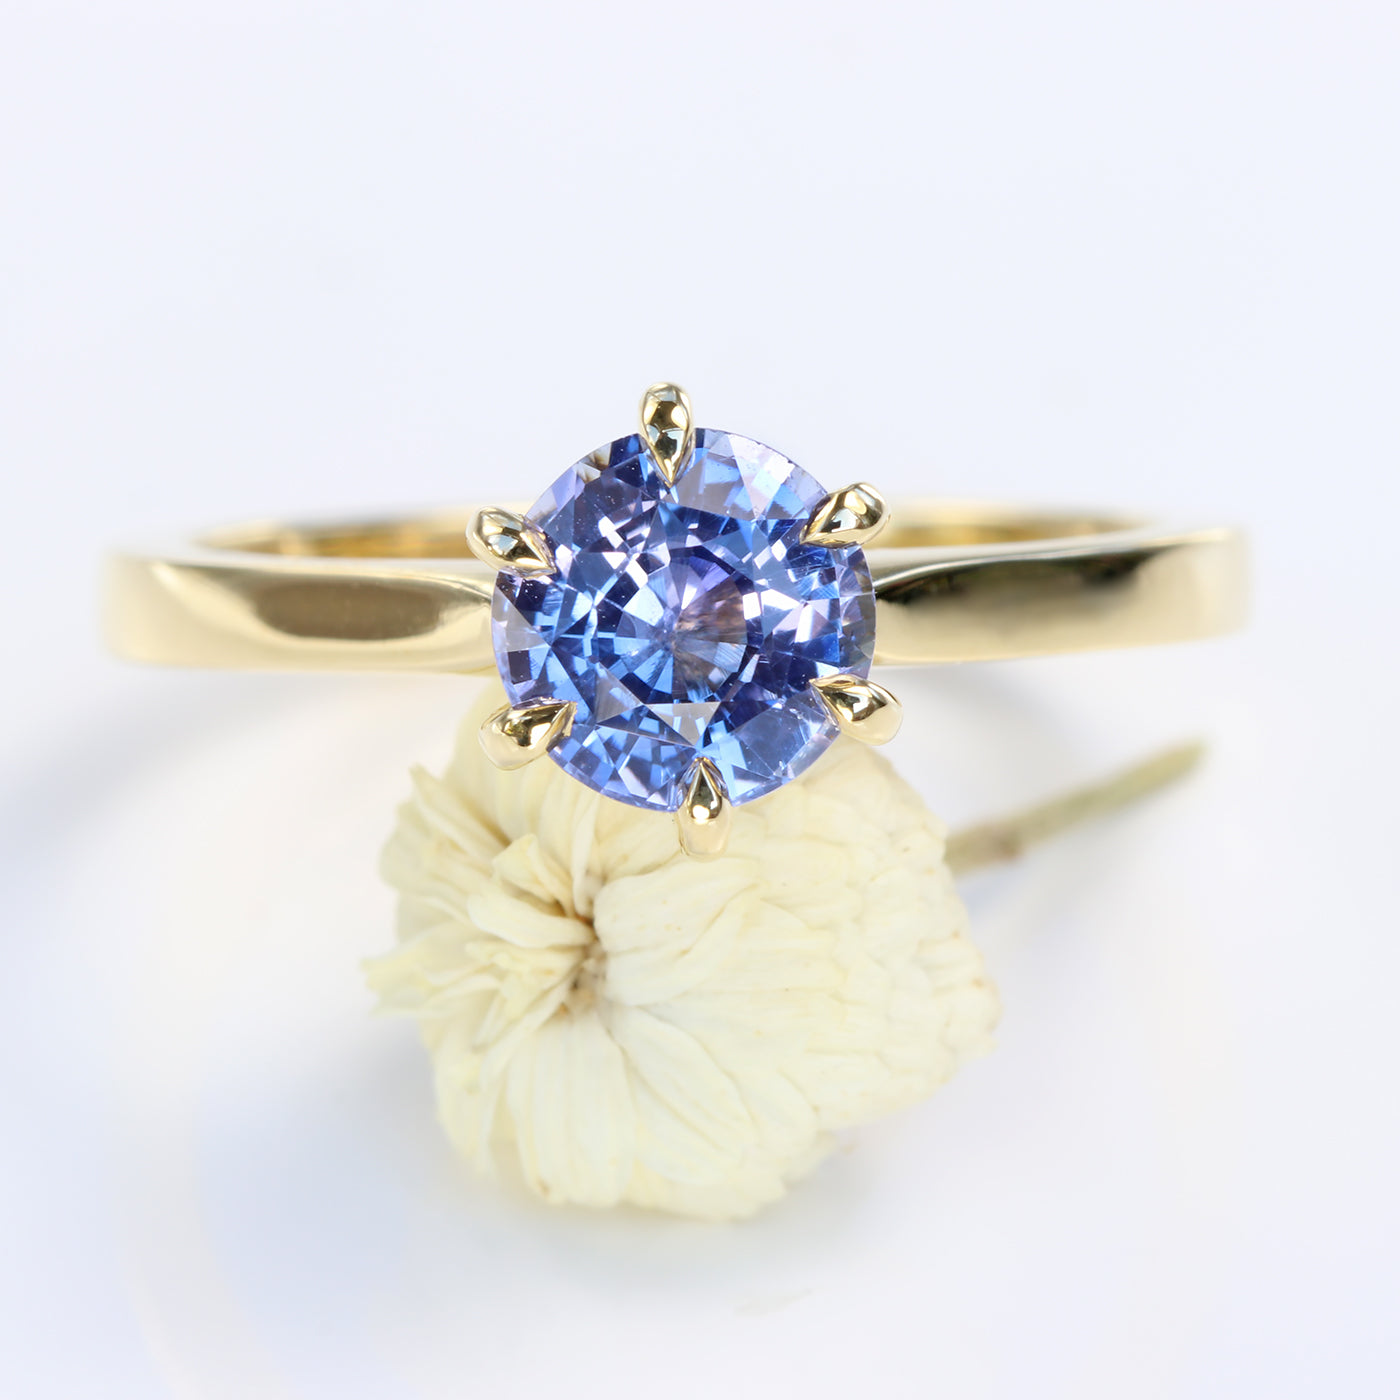 Periwinkle Blue Sapphire Solitaire Engagement Ring (Size L, Resize J – N)